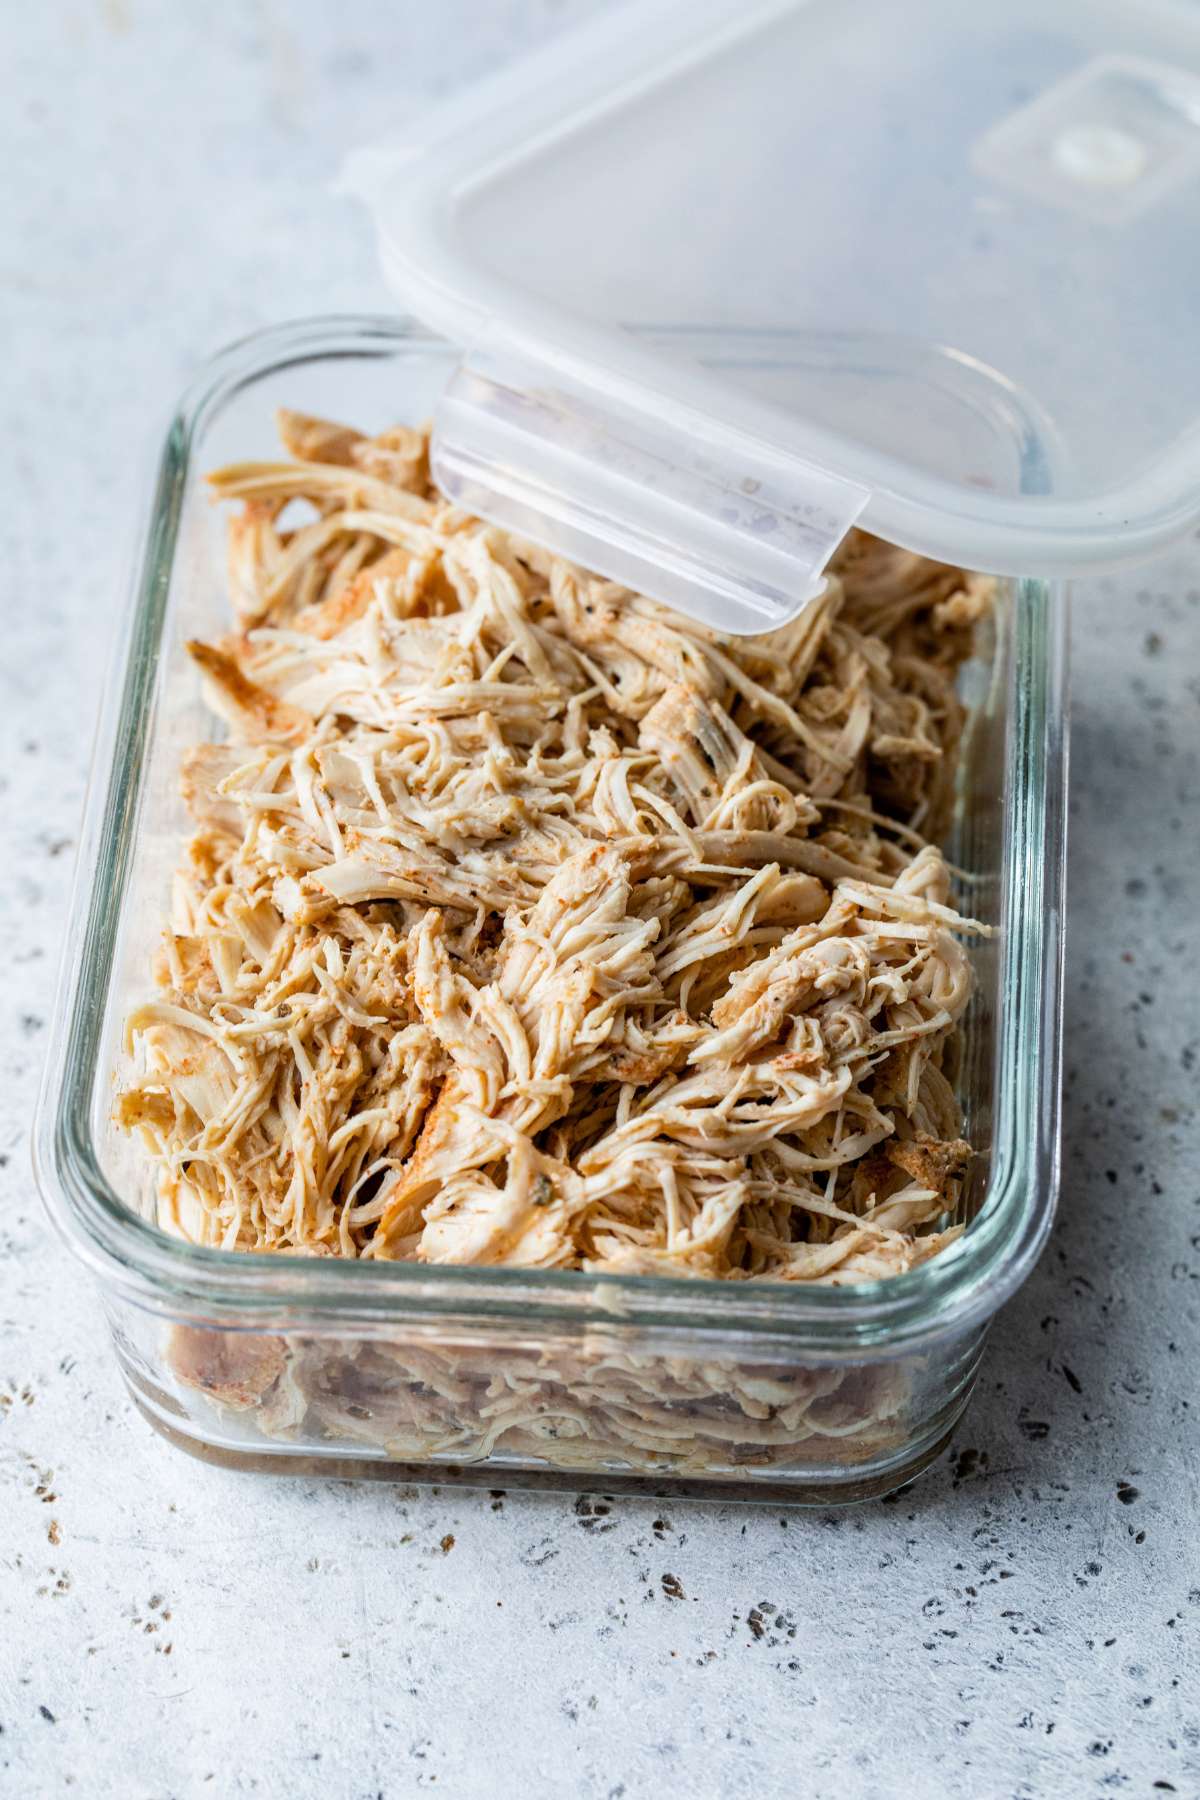 Shredded chicken in a glass storage container.